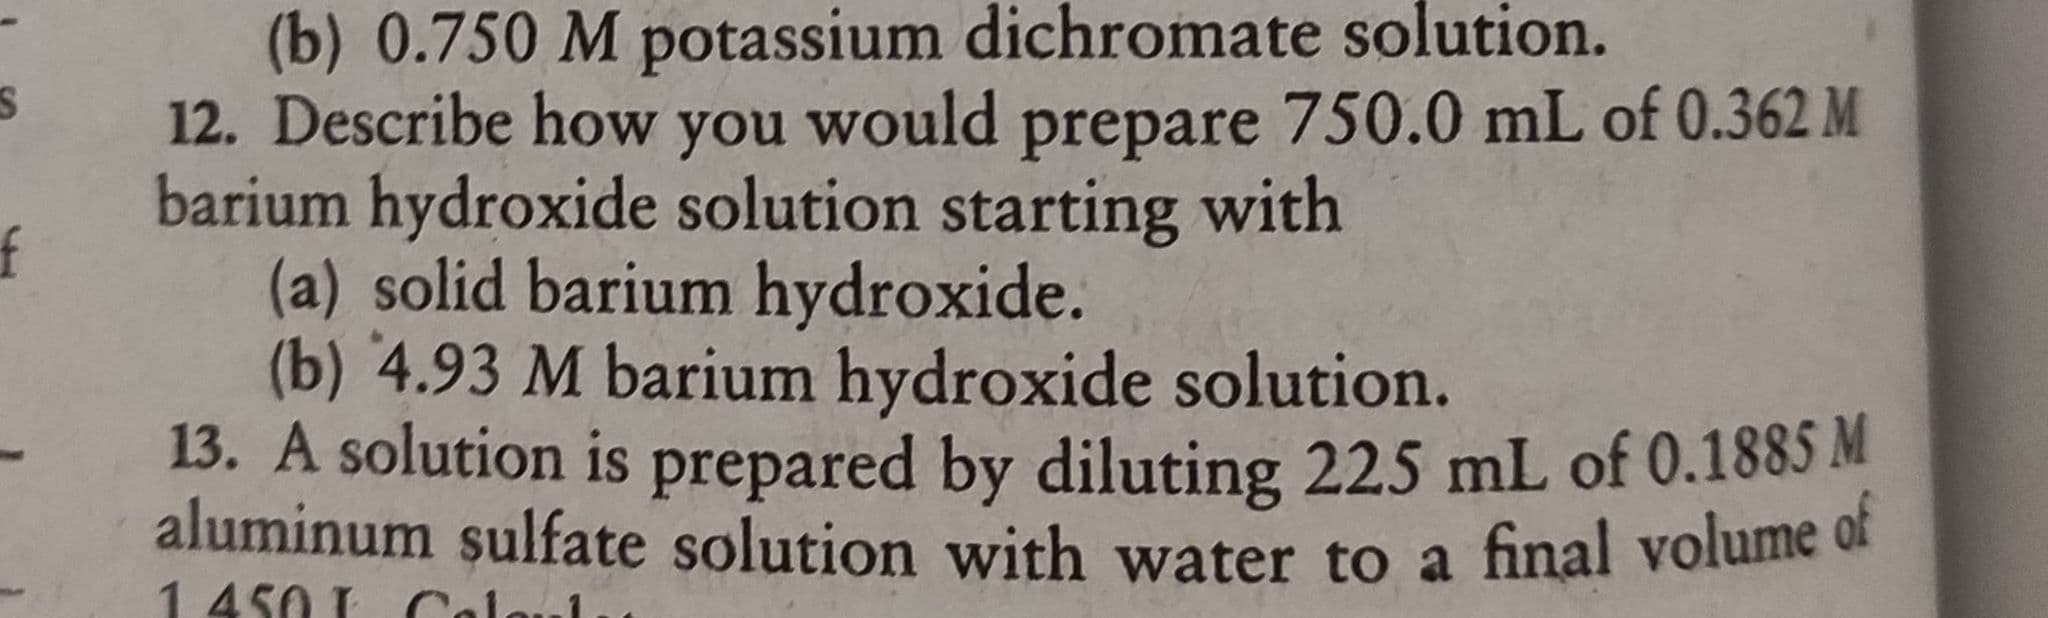 (b) 0.750 M potassium dichromate solution.
12. Describe how you would prepare 750.0 mL of 0.362 M
barium hydroxide solution starting with
(a) solid barium hydroxide.
(b) 4.93 M barium hydroxide solution.
13. A solution is prepared by diluting 225 mL of 0.1885 M
aluminum sulfate solution with water to a final volume of
1450 Cal
